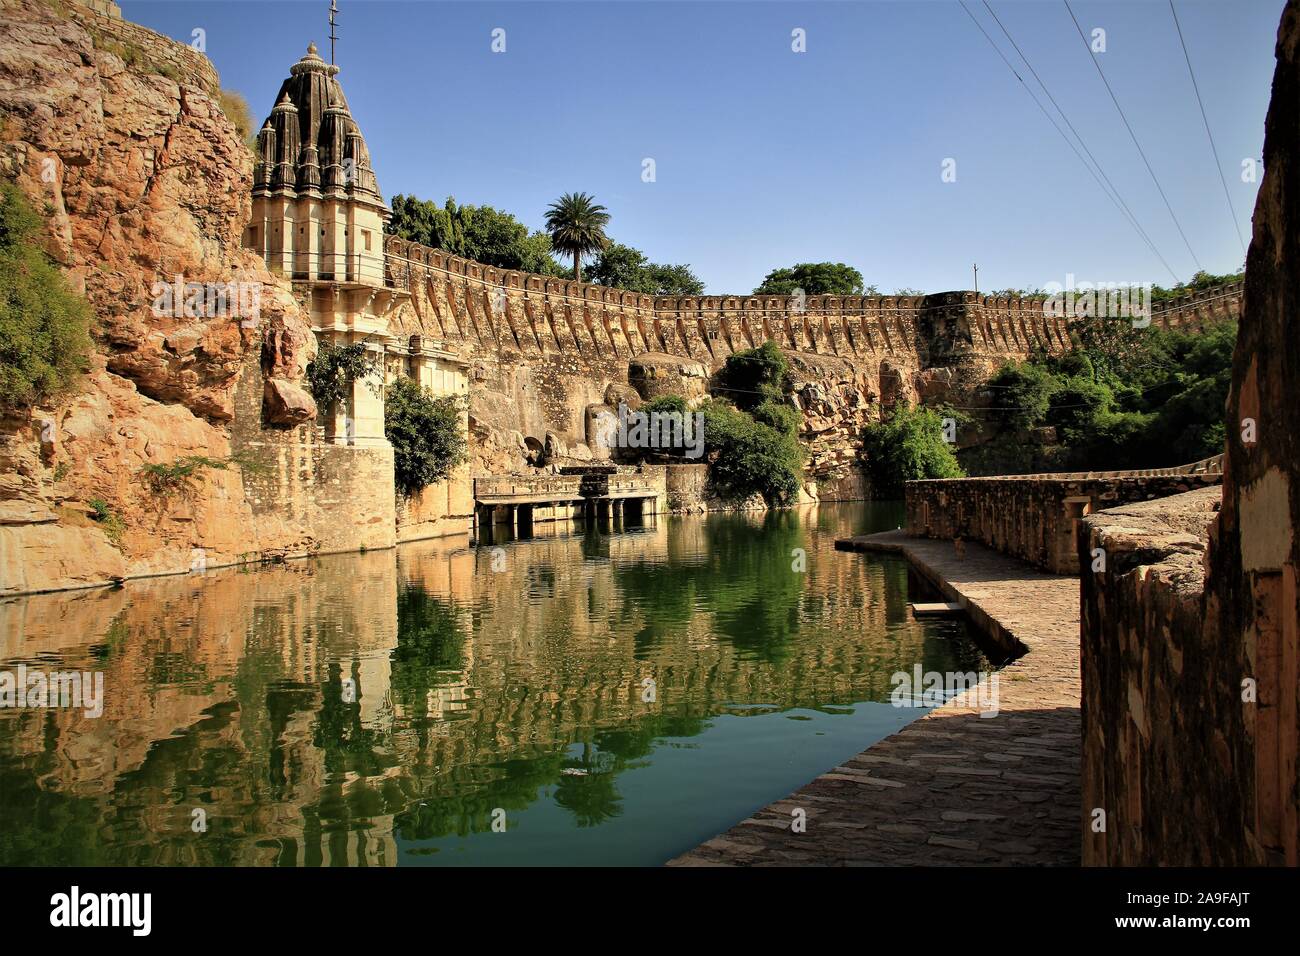 The Chittor Fort or Chittorgarh is one of the largest forts in India.It is a UNESCO World Heritage Site.The fort was the capital of Mewar. Stock Photo